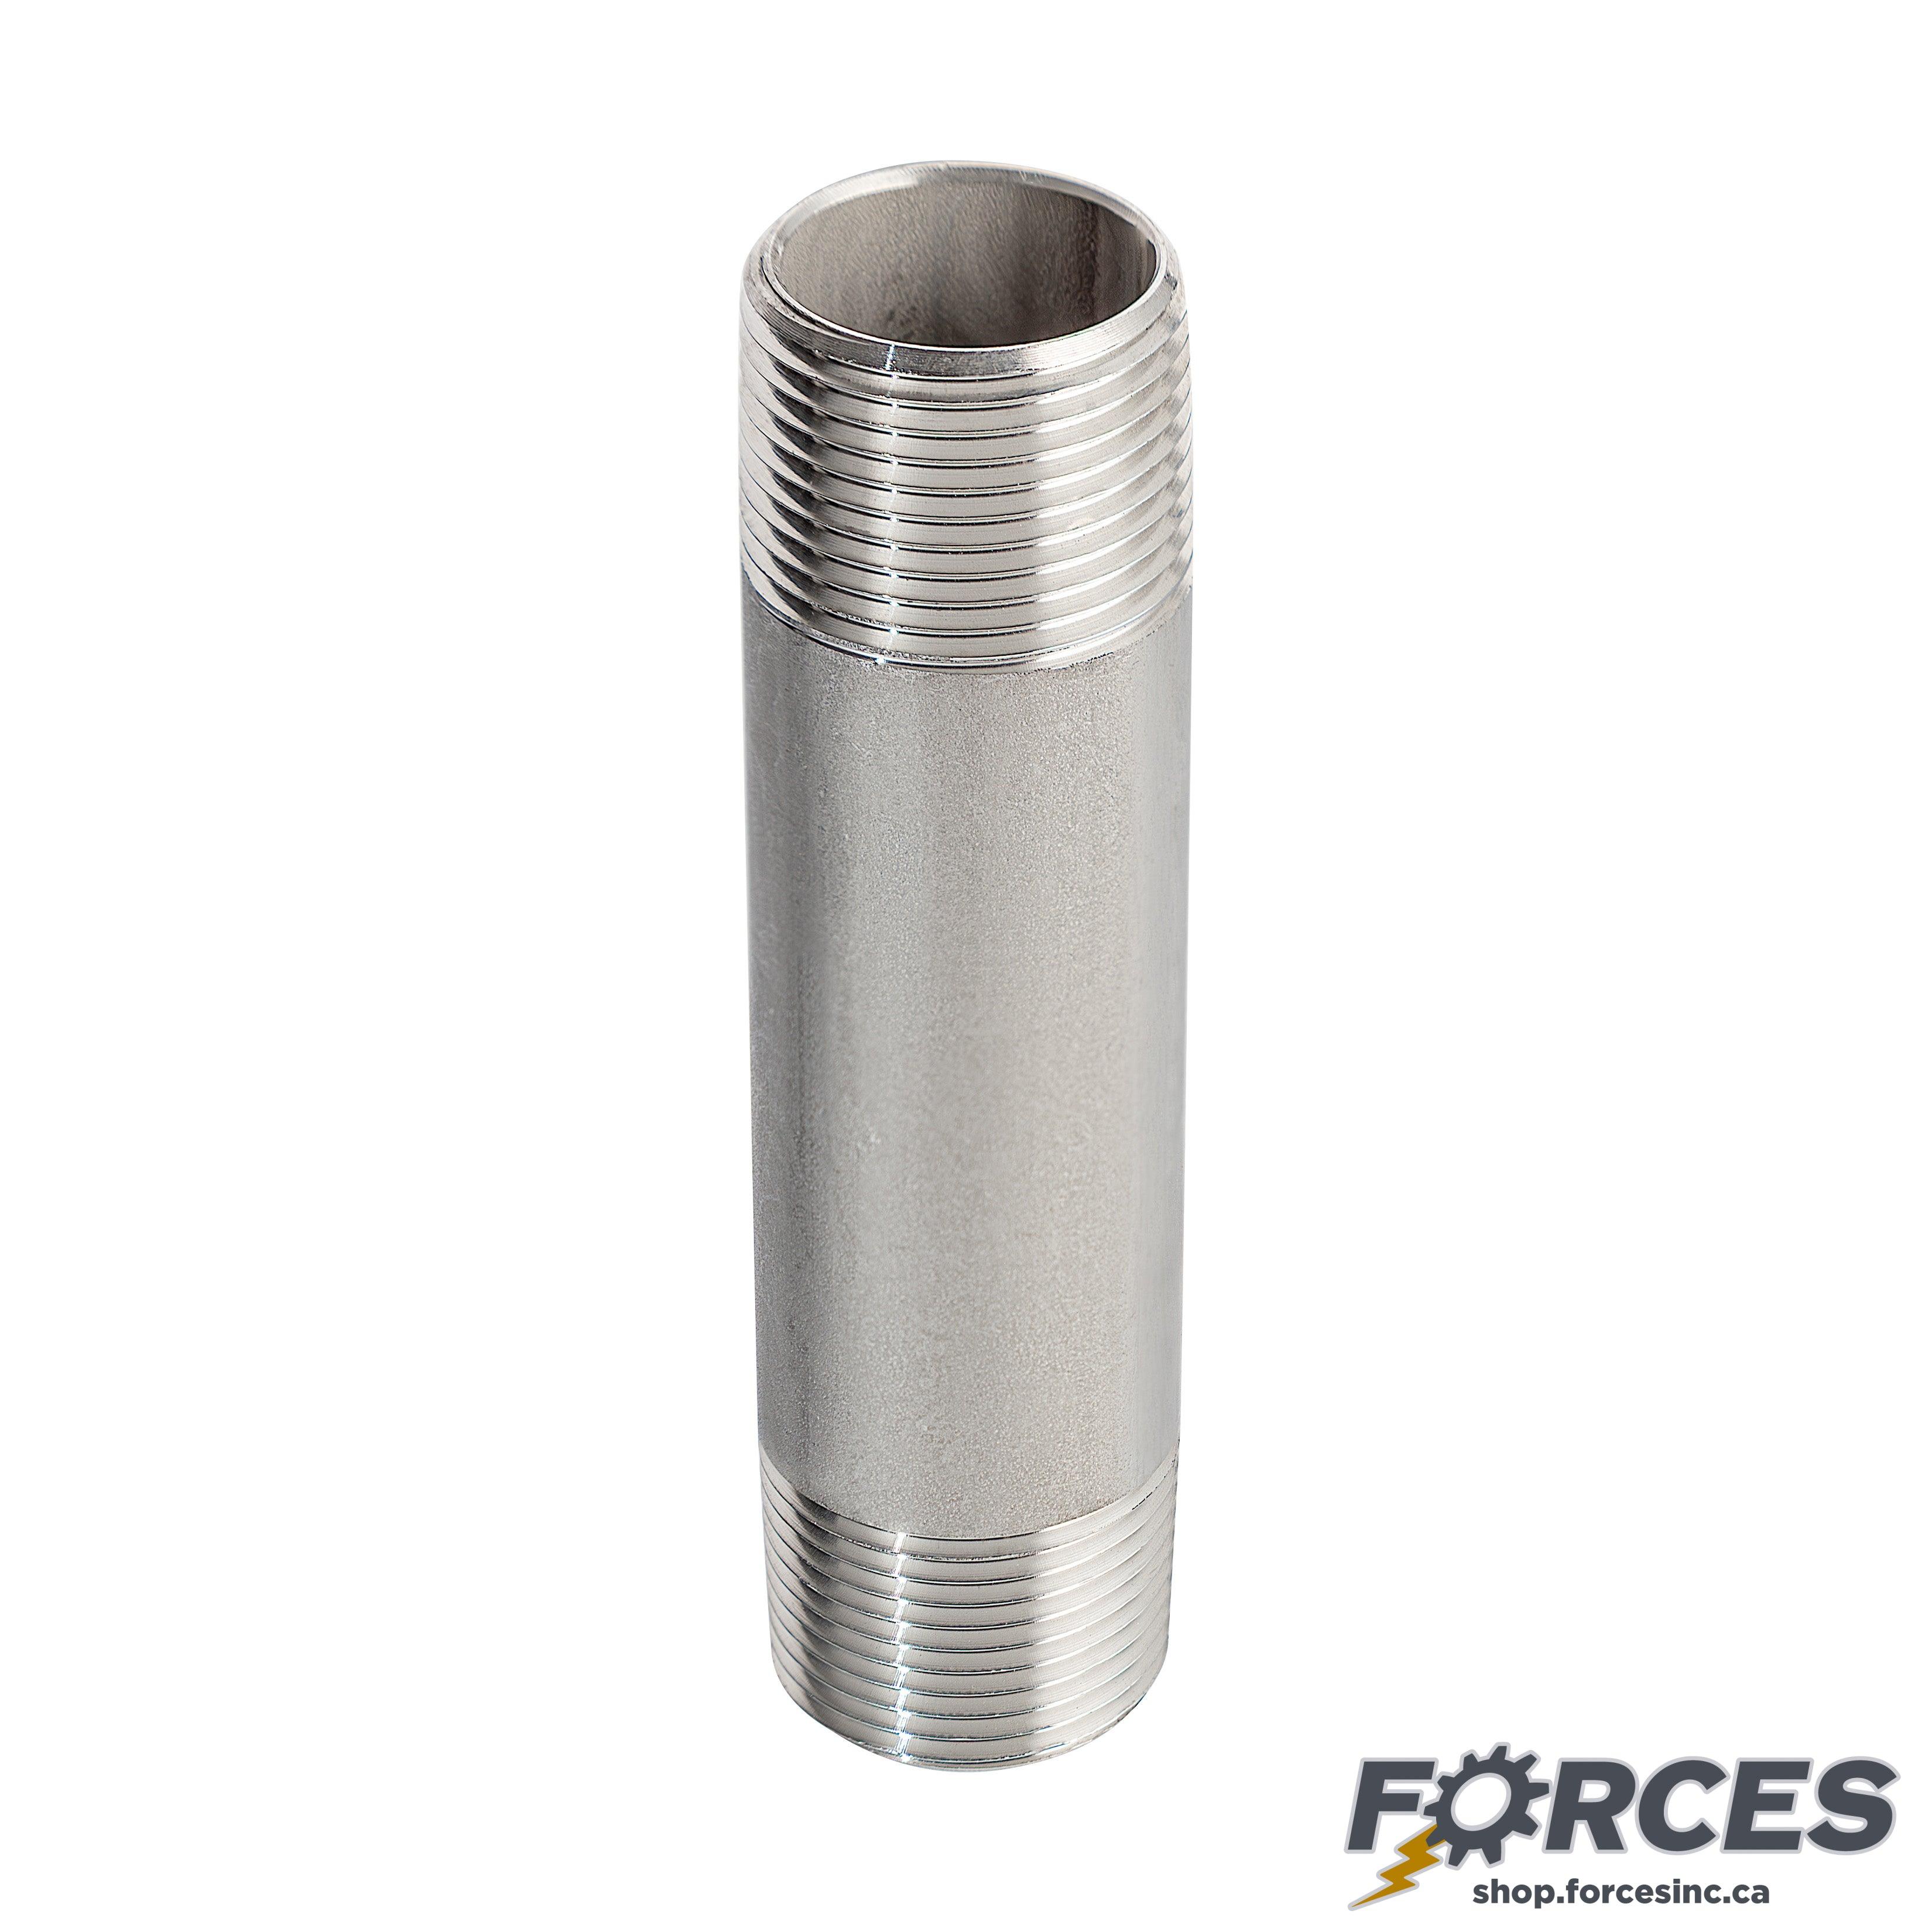 1-1/4" X 4" Long Nipple - Stainless Steel 316 - Forces Inc